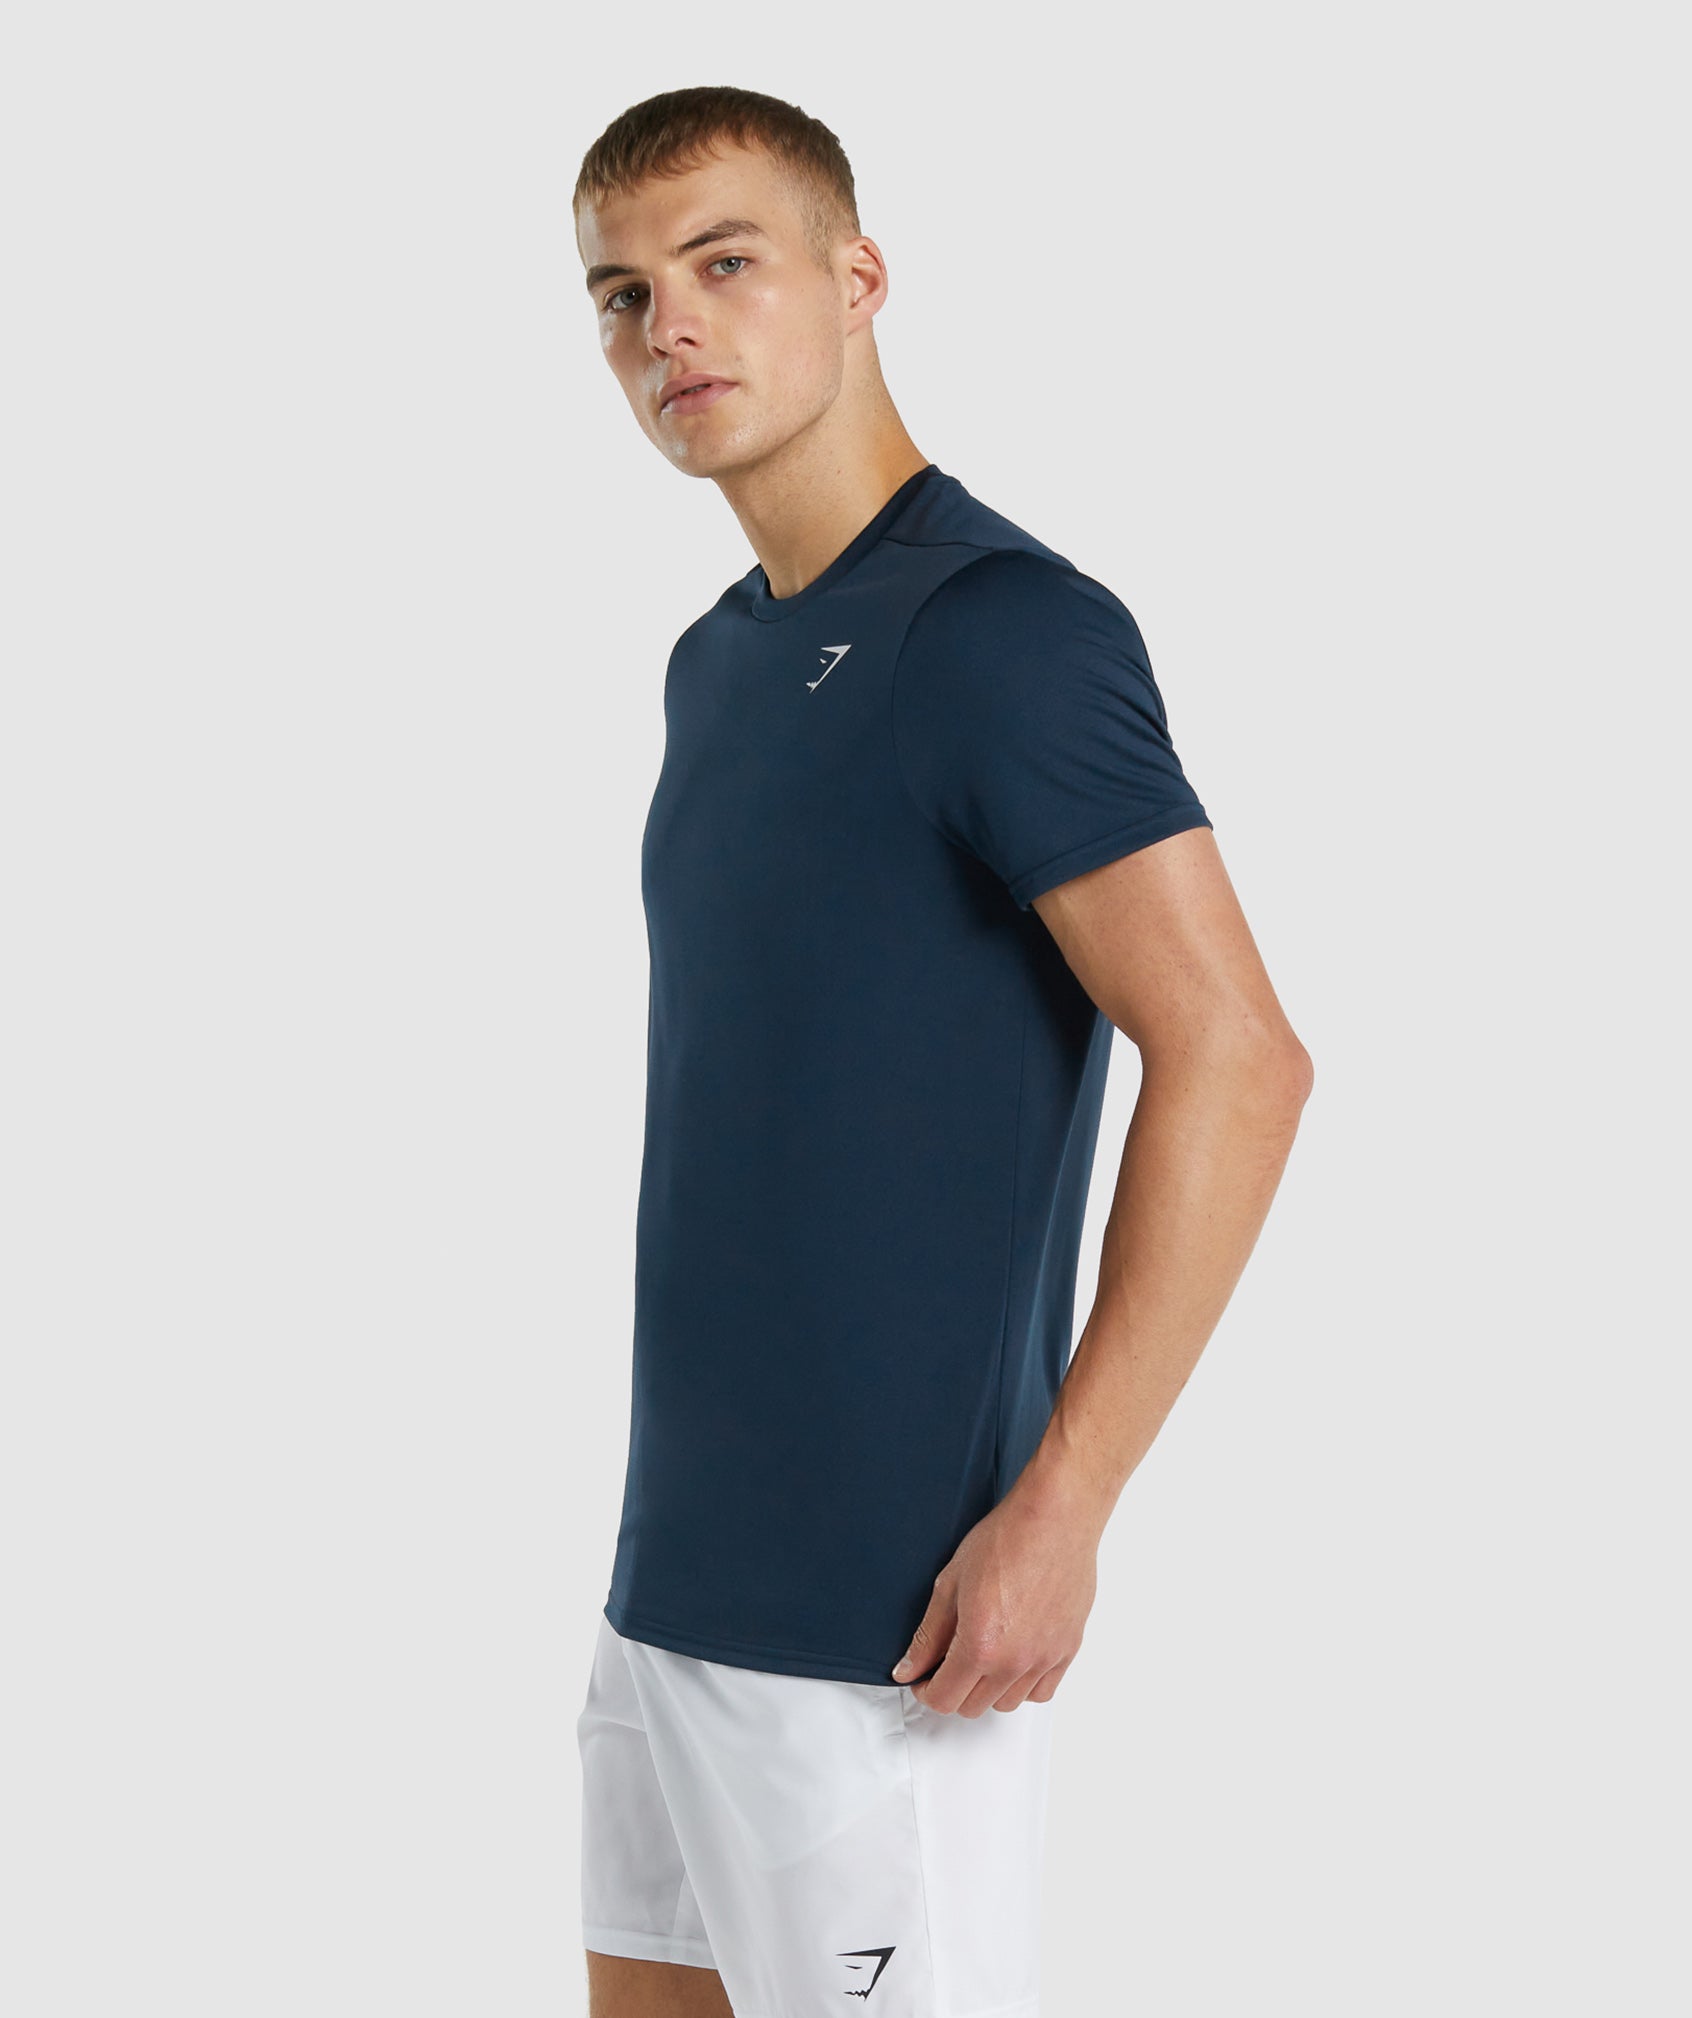 Arrival Regular Fit T-Shirt in Navy - view 3